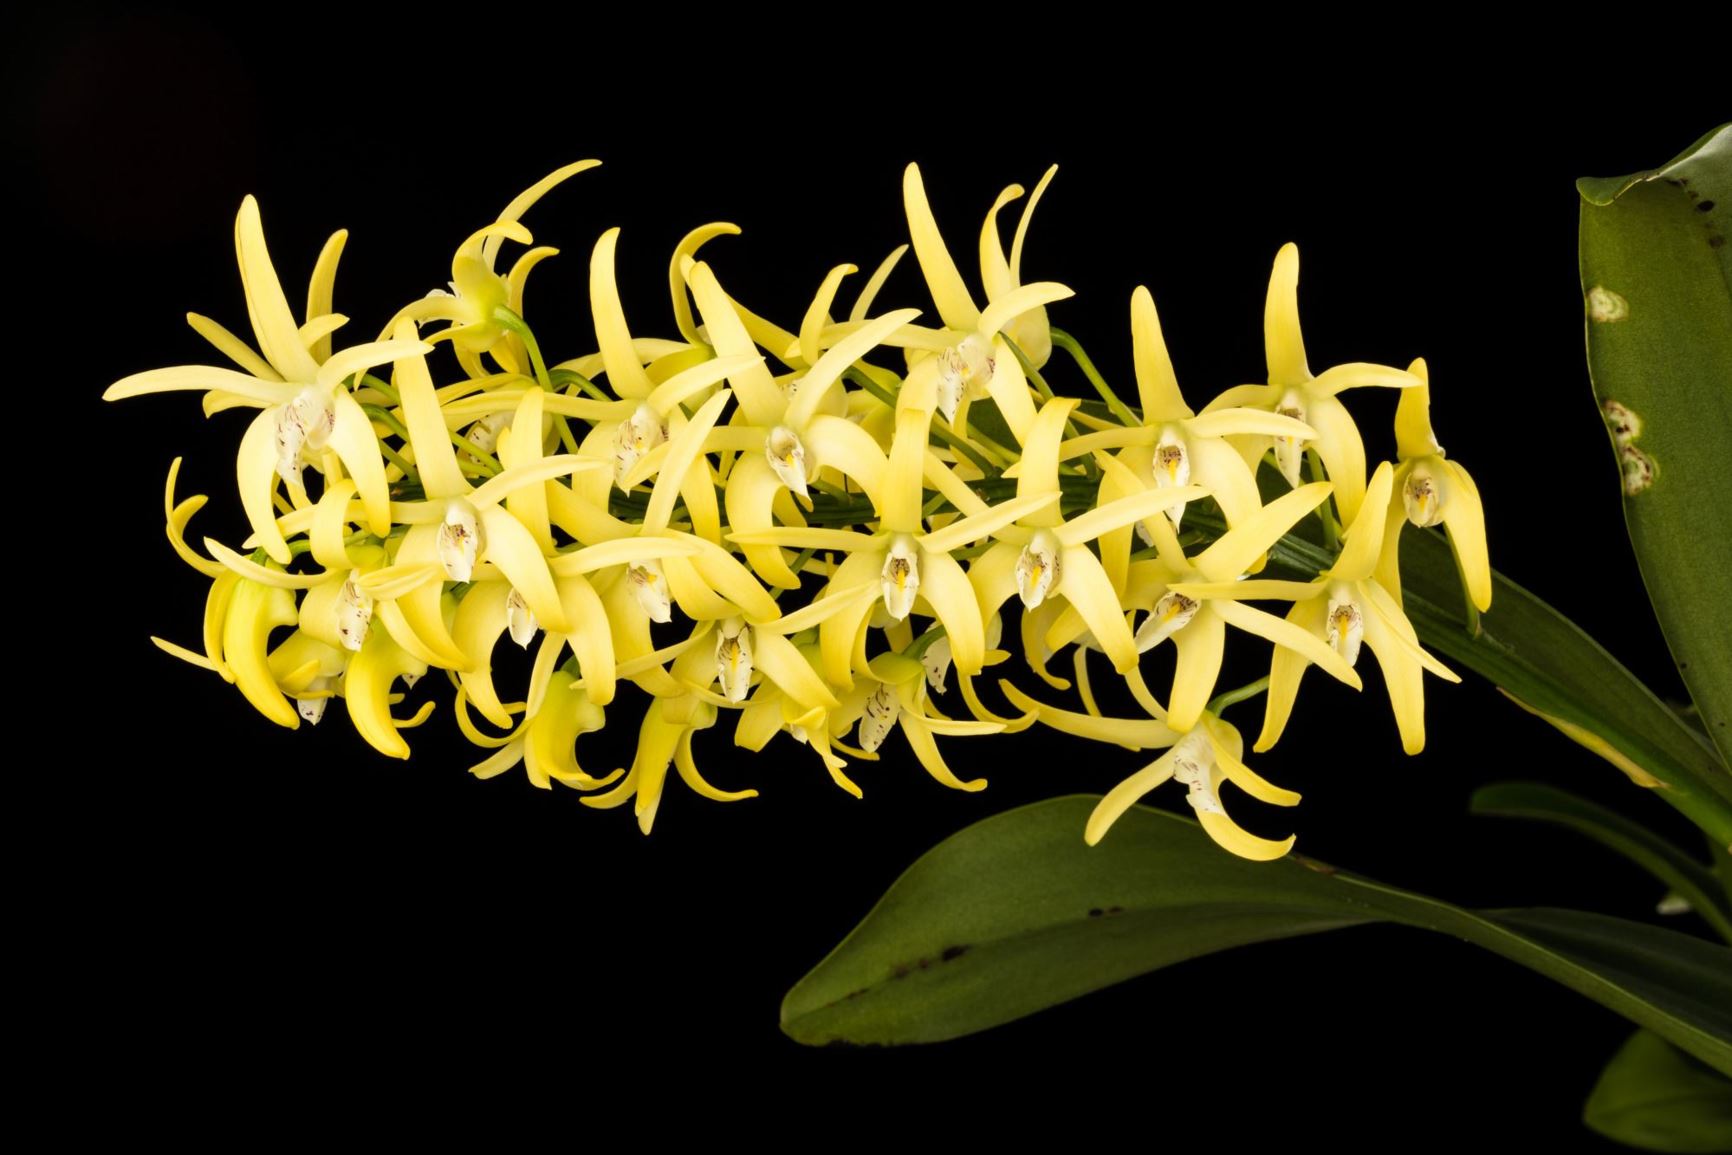 Dendrobium speciosum 'Golden Arch' - Rock Lily clone, Sydney Rock Orchid clone, The Outstanding Dendrobium clone